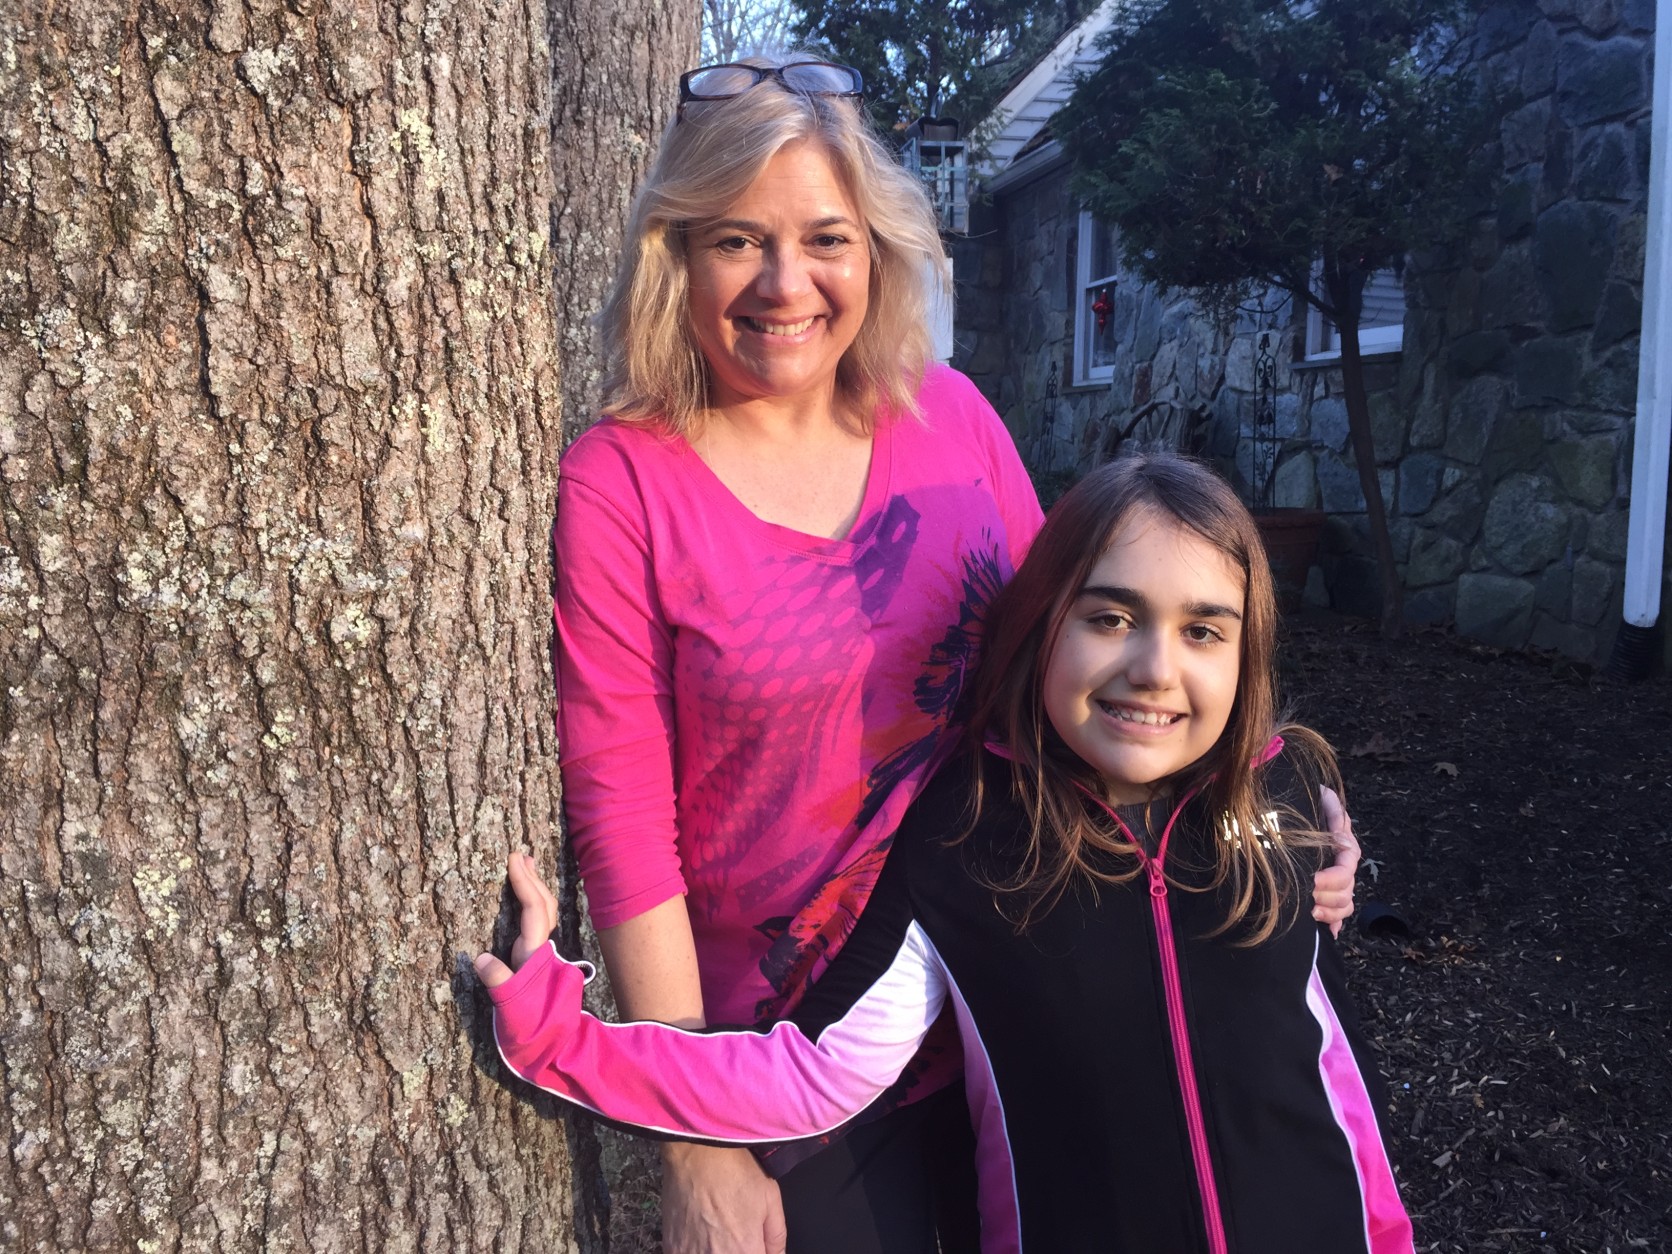 Natasha Troike, 11, was diagnosed with Aplastic Anemia in March and needs a “perfect match” bone marrow donation to be cured. (WTOP/Kristi King)